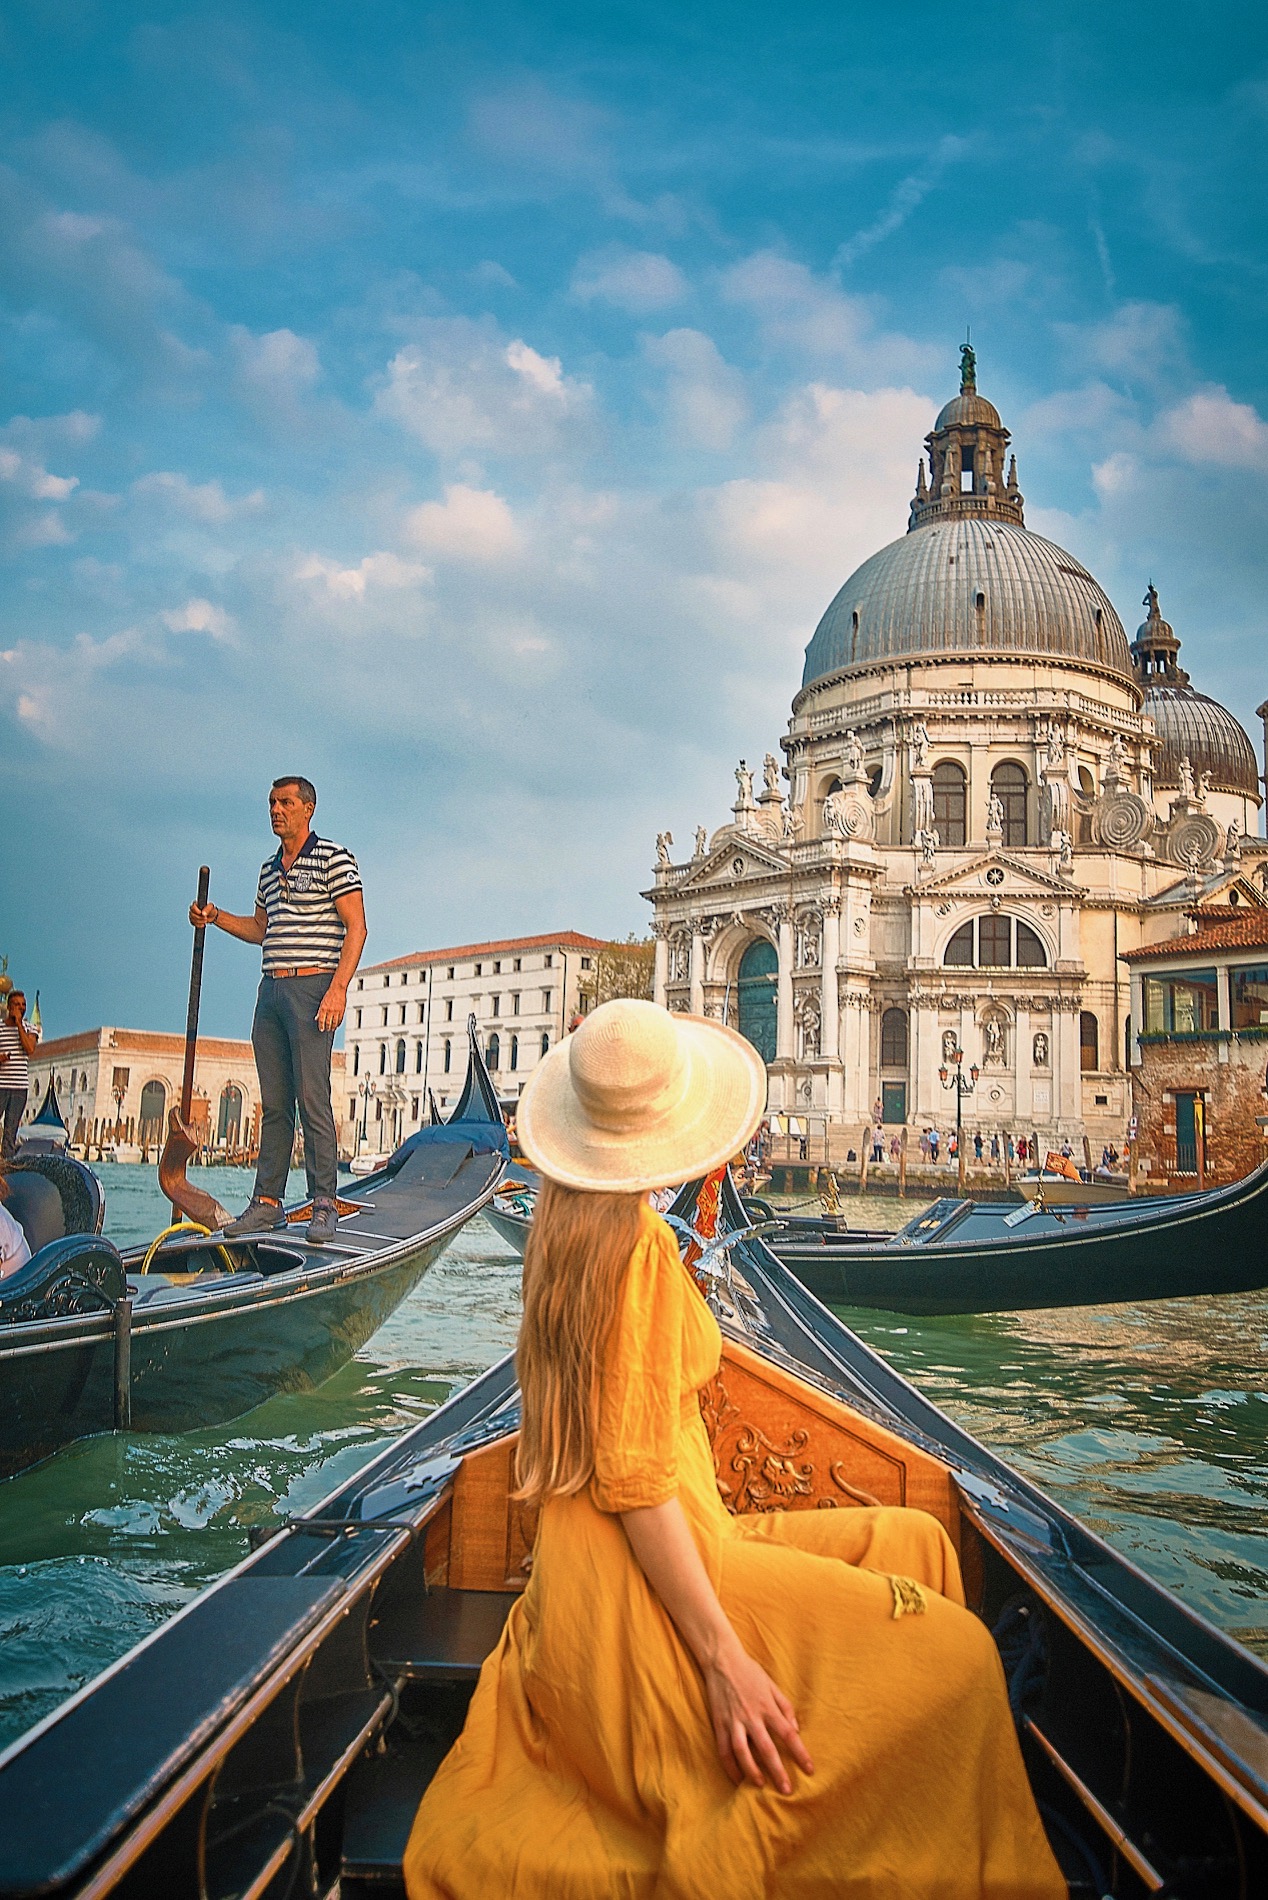 a girl in a yellow dress sitting in a gondola on the Grand Canal